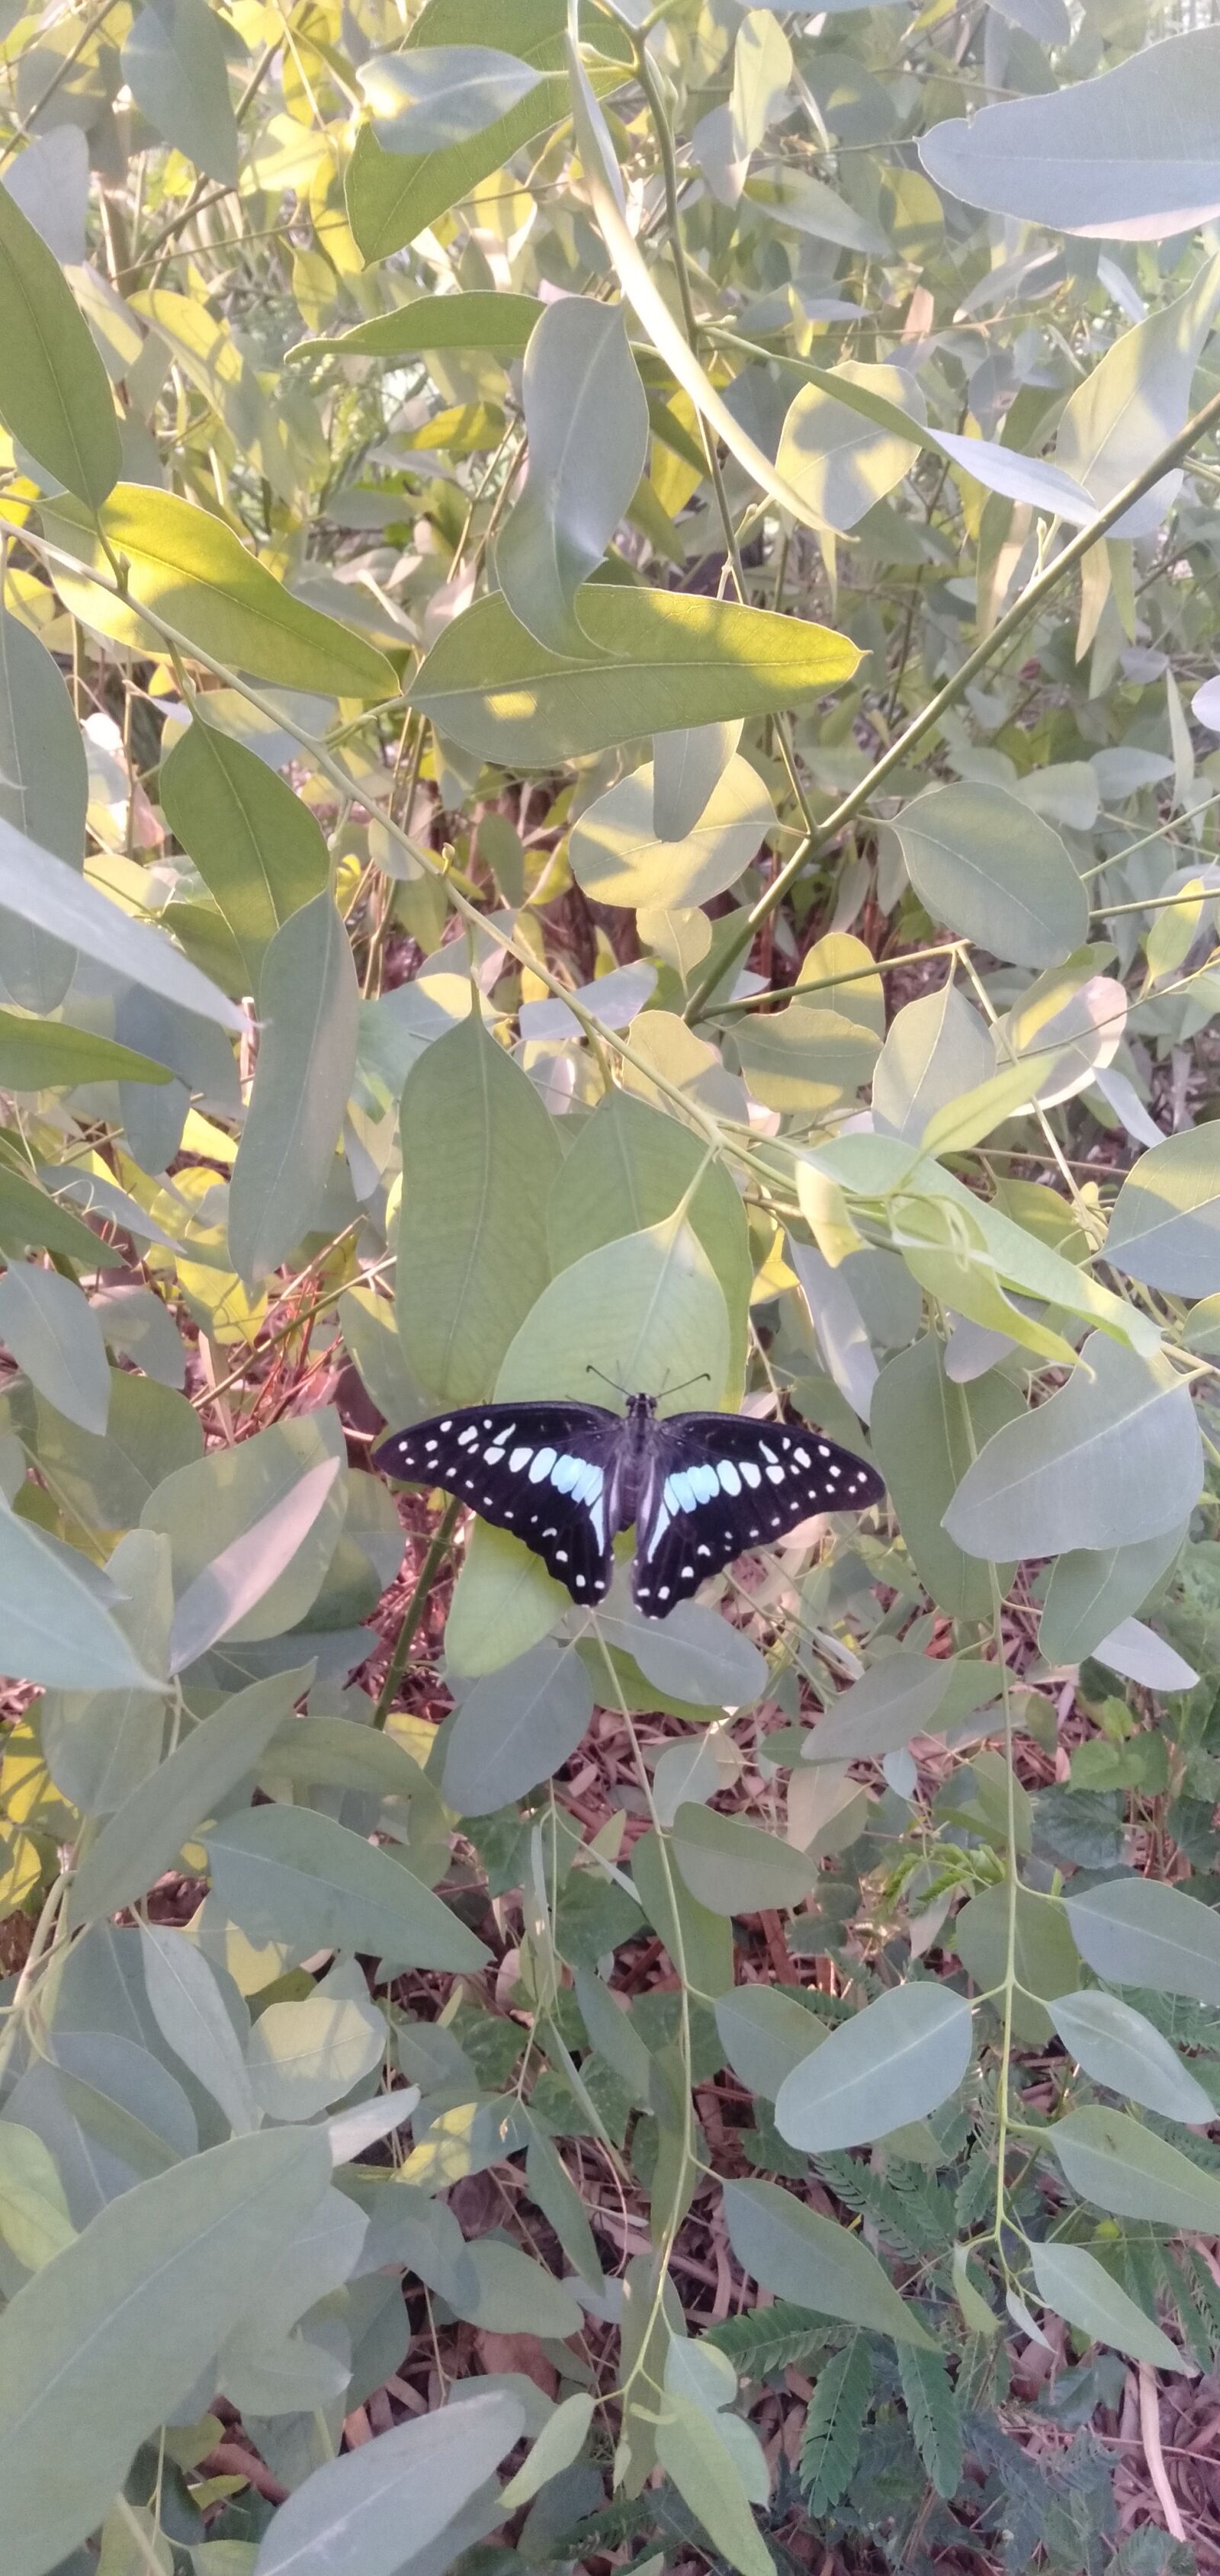 OPPO A3S sample photo. Butterfly, forest image, forest photography